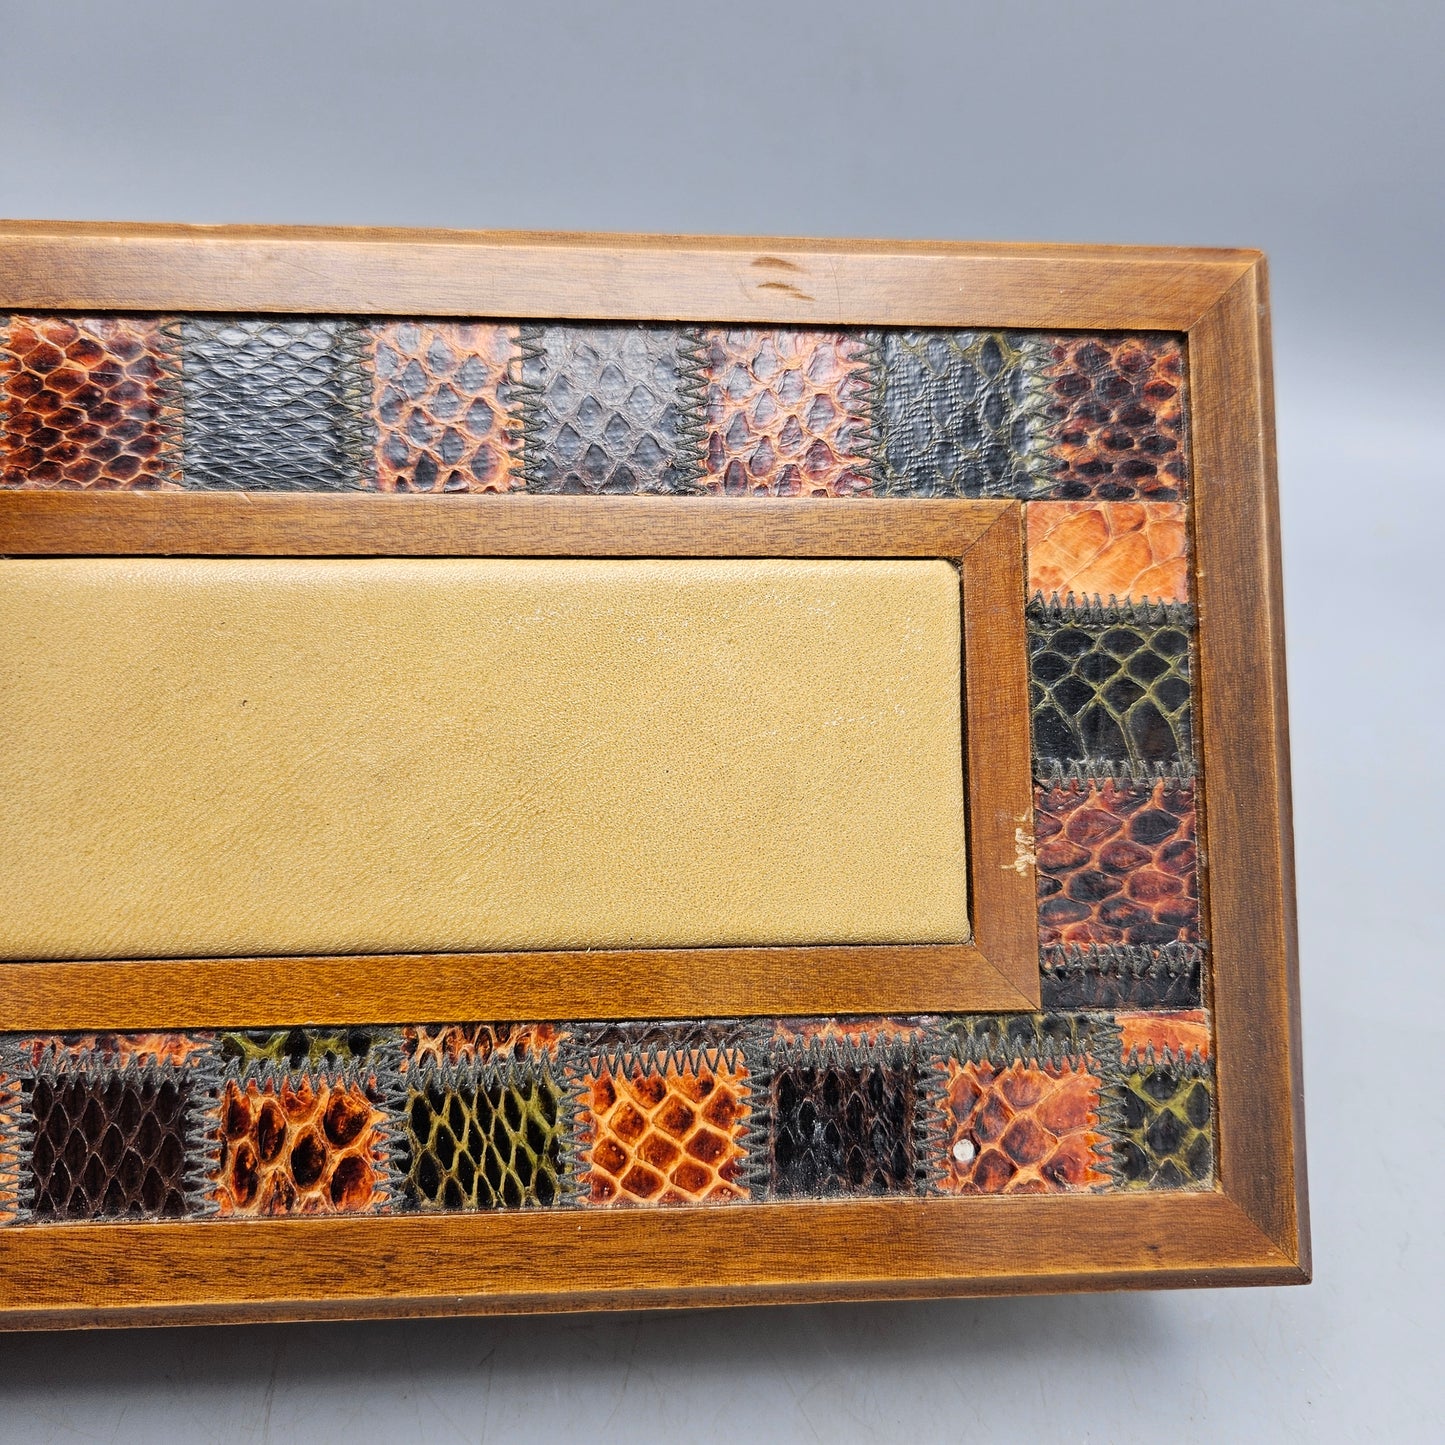 MCM Italian Leather and Snakeskin Jewelry Box - Made in Italy